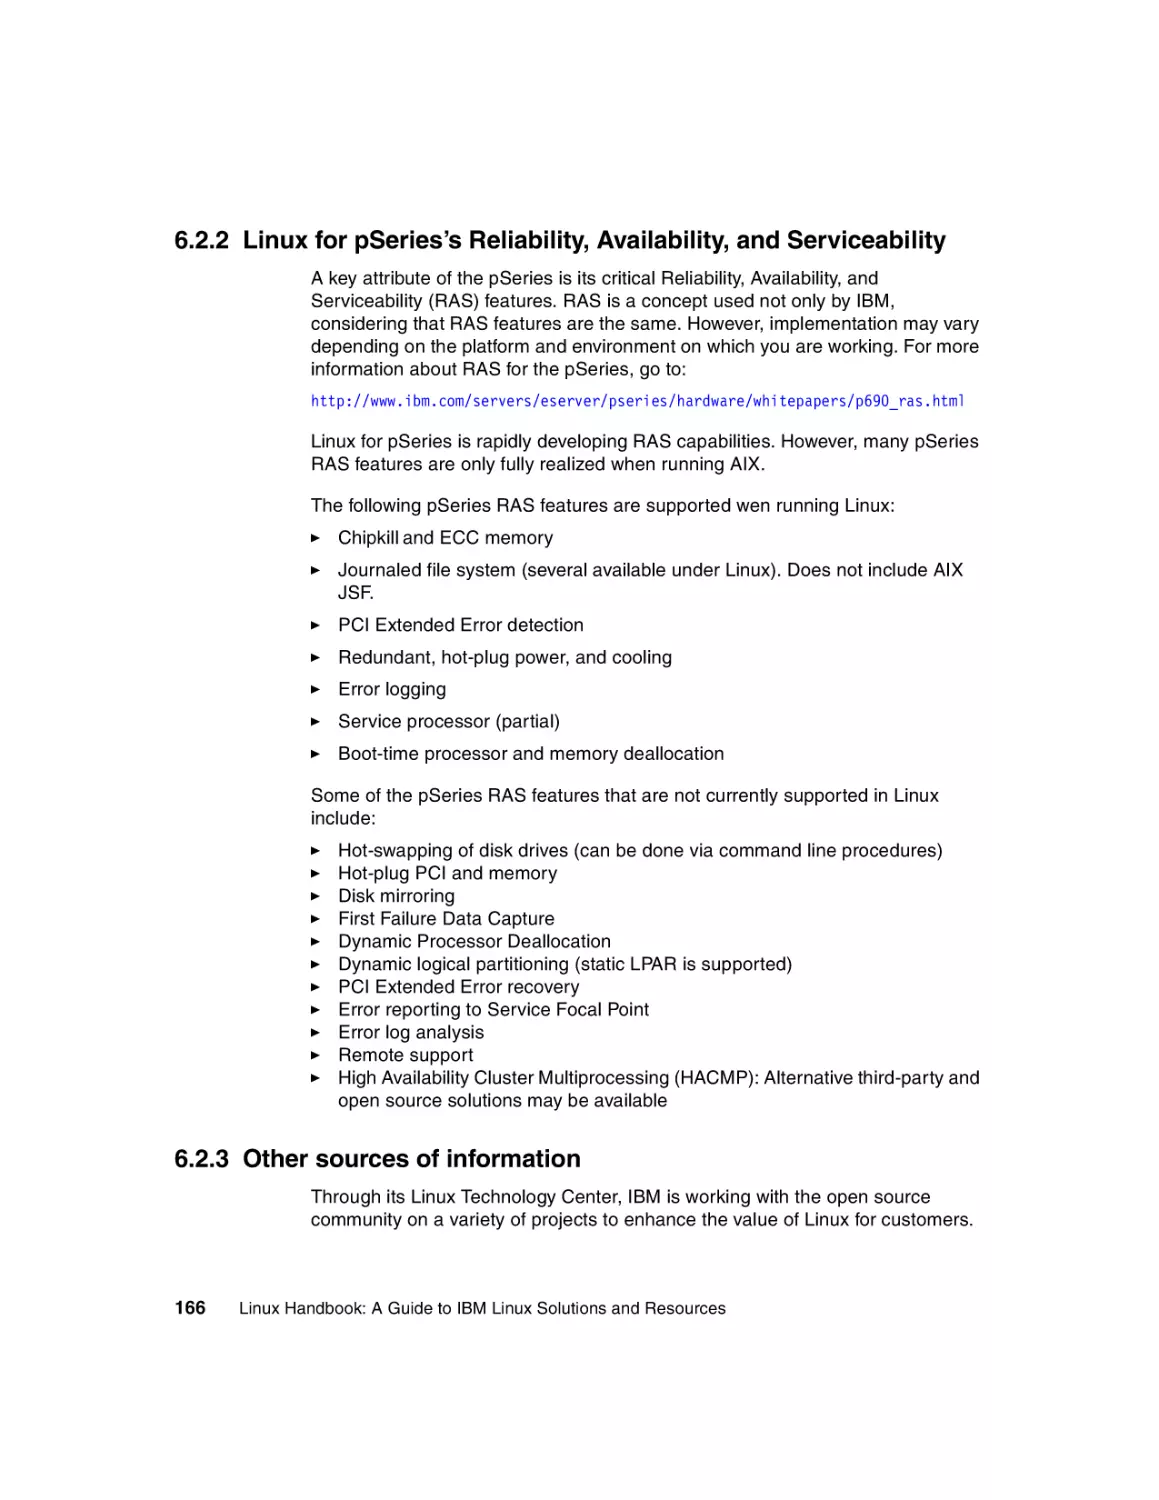 6.2.2 Linux for pSeries’s Reliability, Availability, and Serviceability
6.2.3 Other sources of information